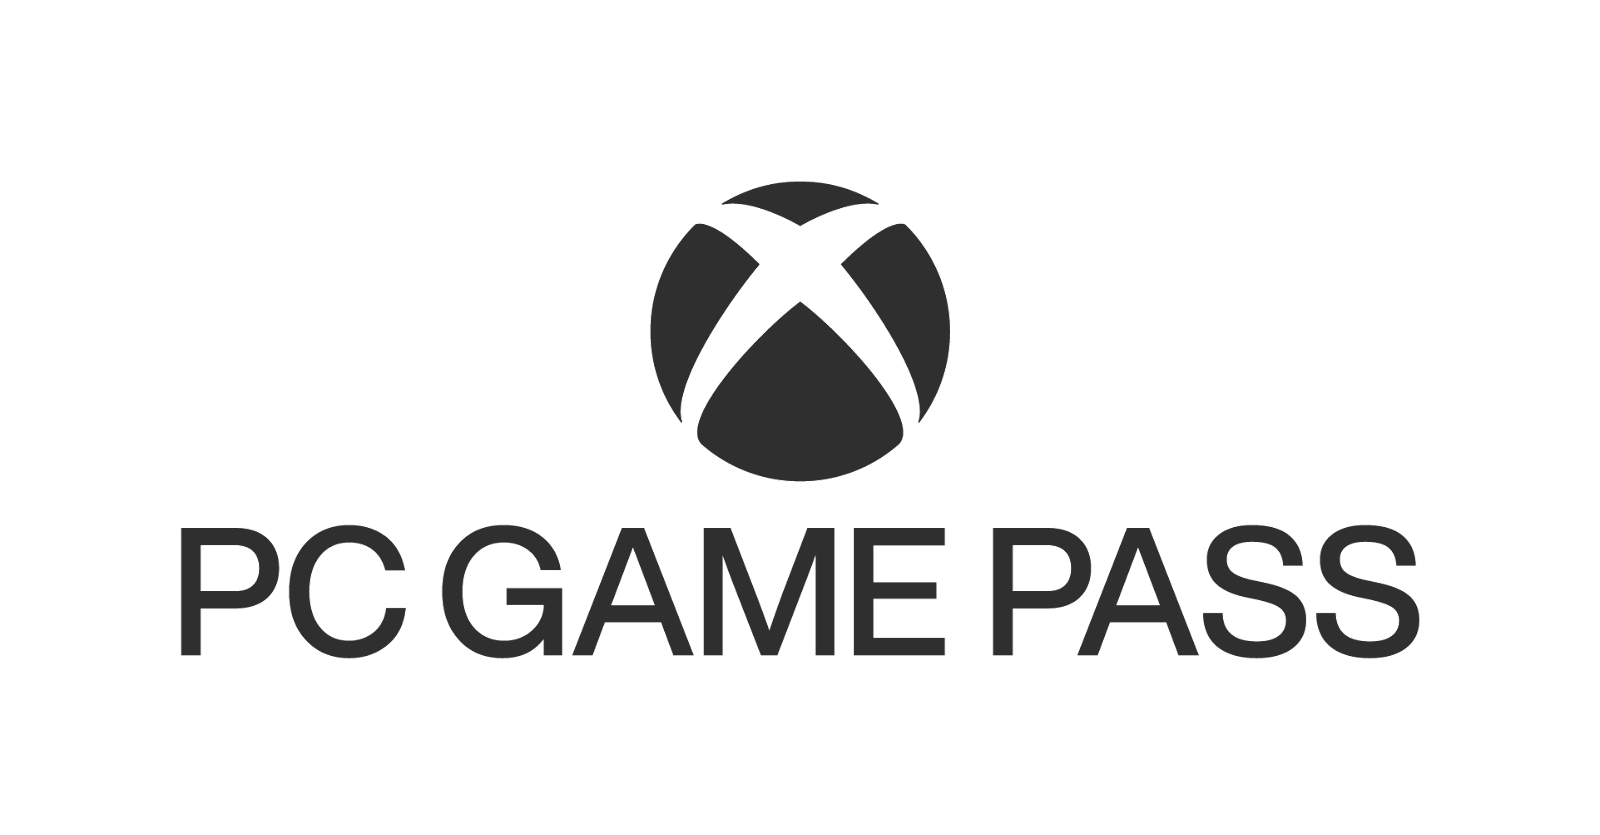 Xbox Game Pass Ultimate 2 months Trial (for new Xbox accounts only